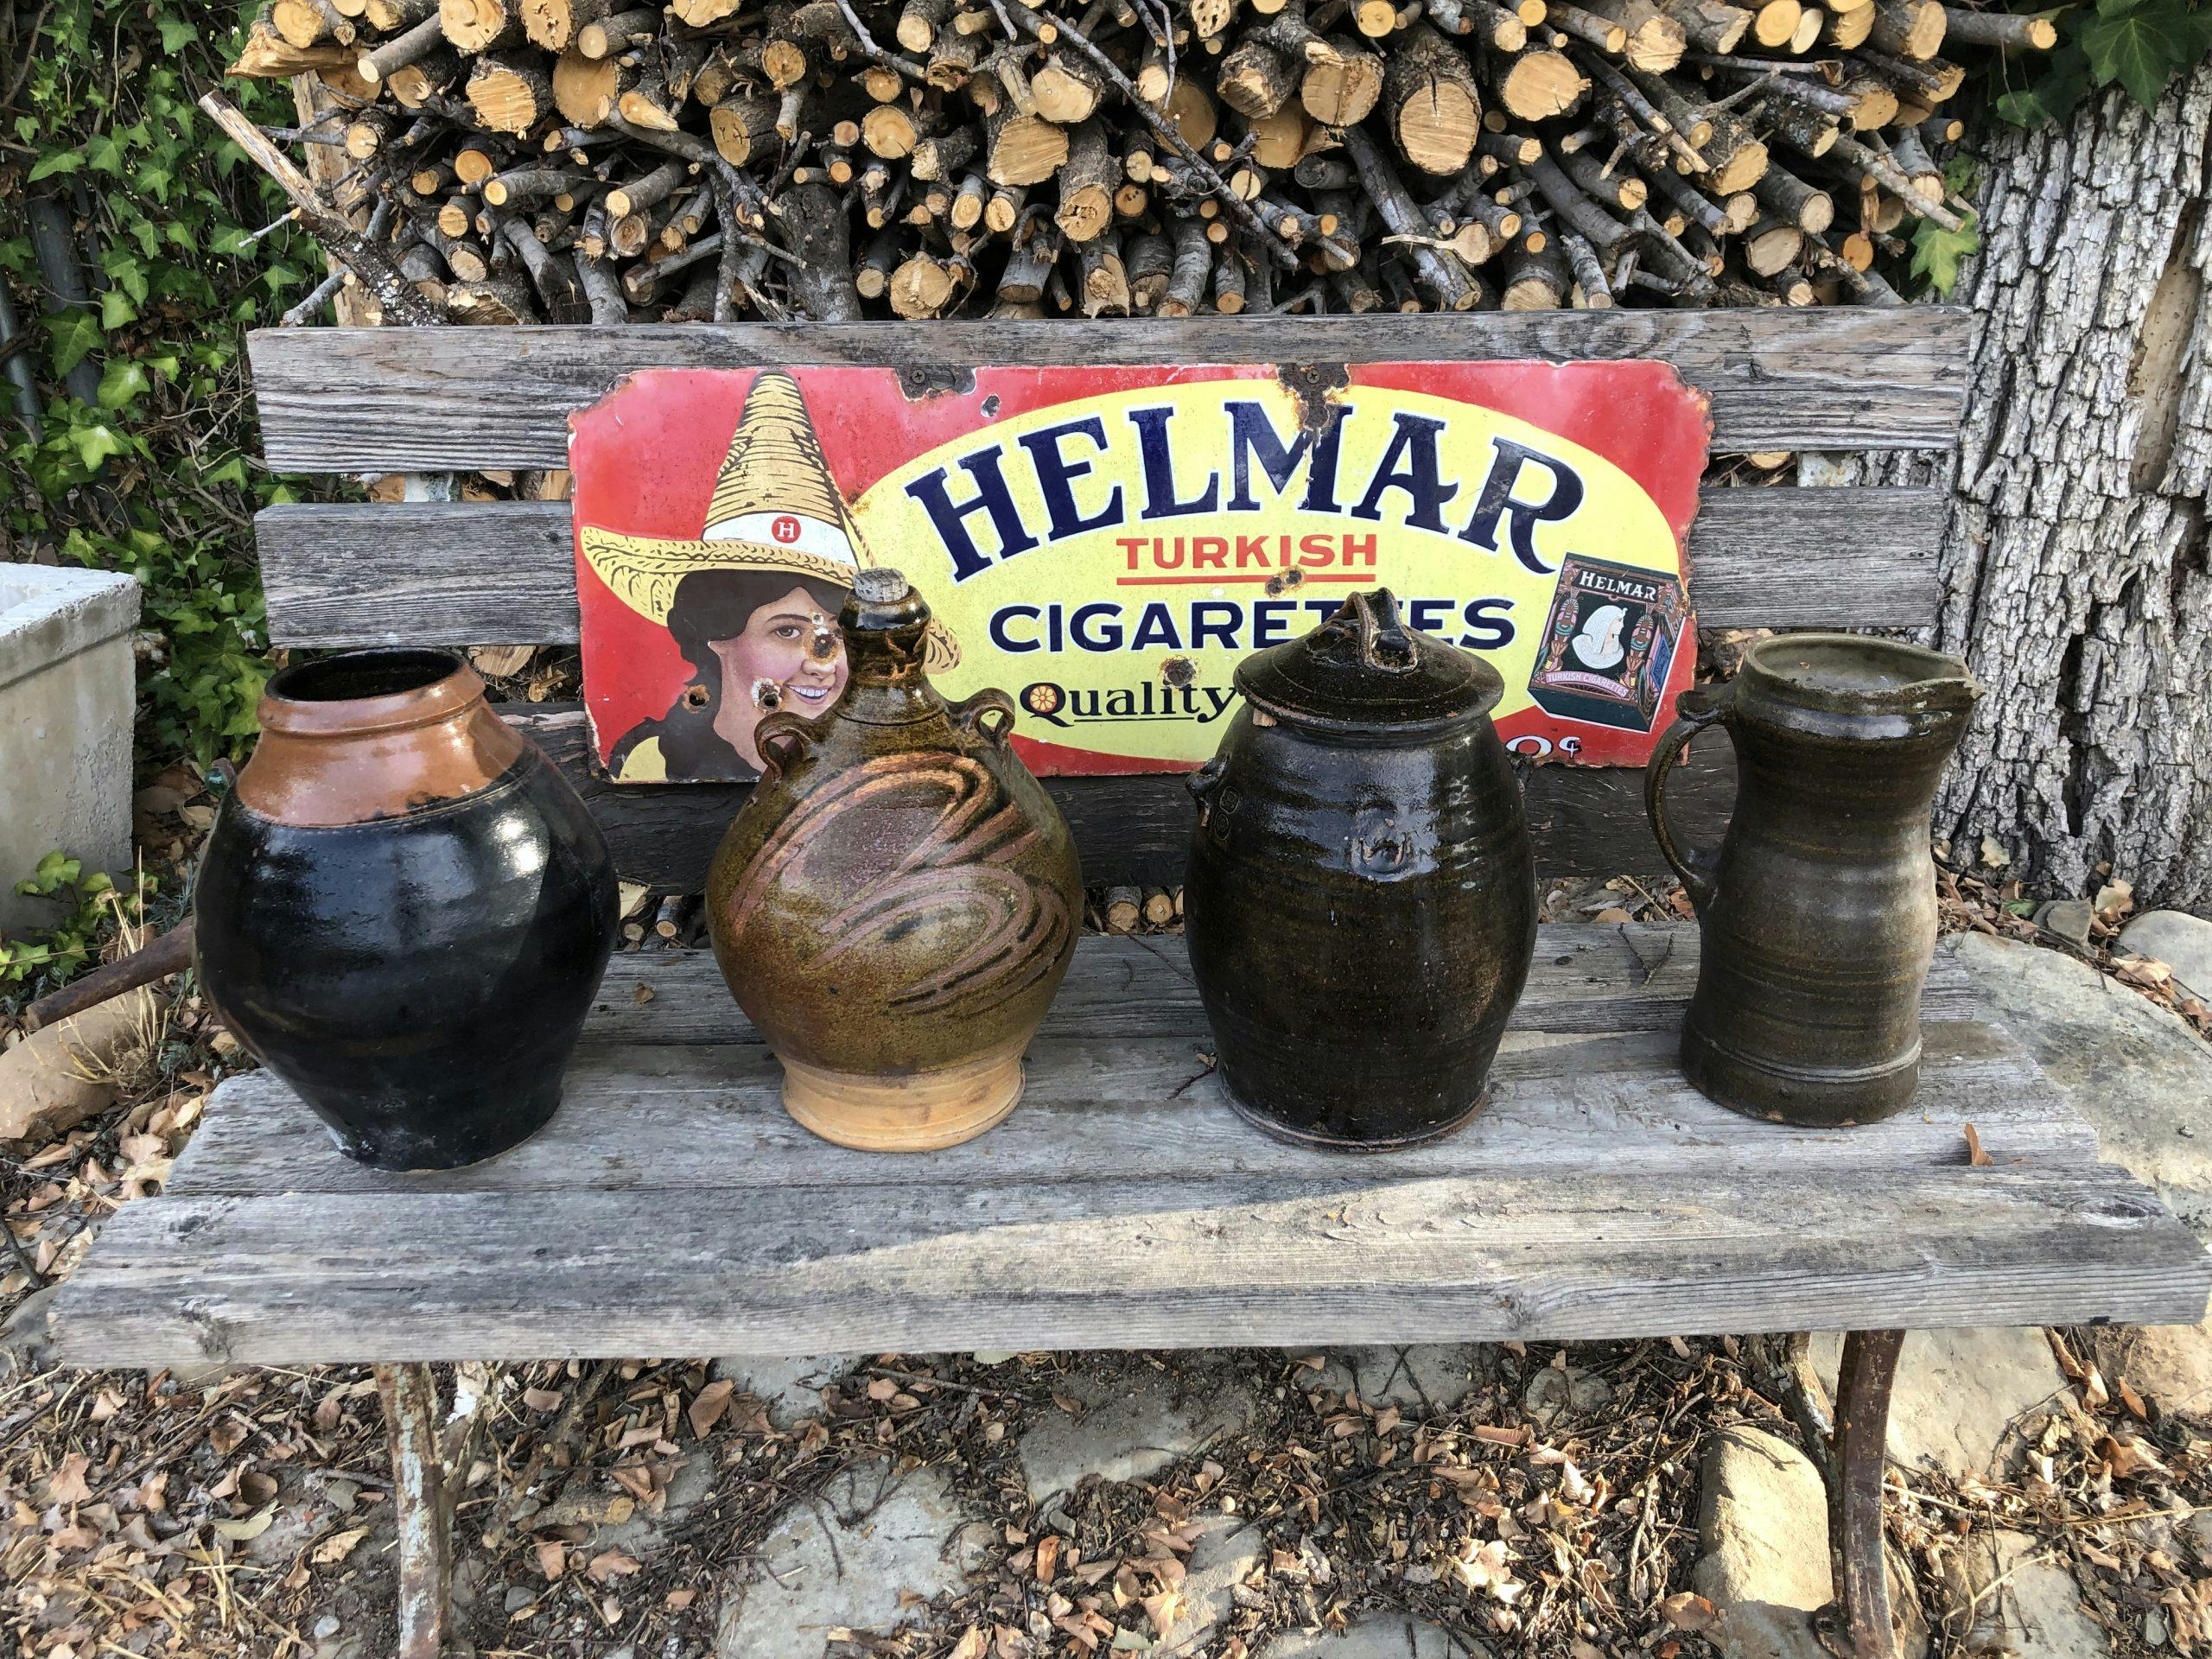 helmar turkish cigarettes sign on bench with antique pots